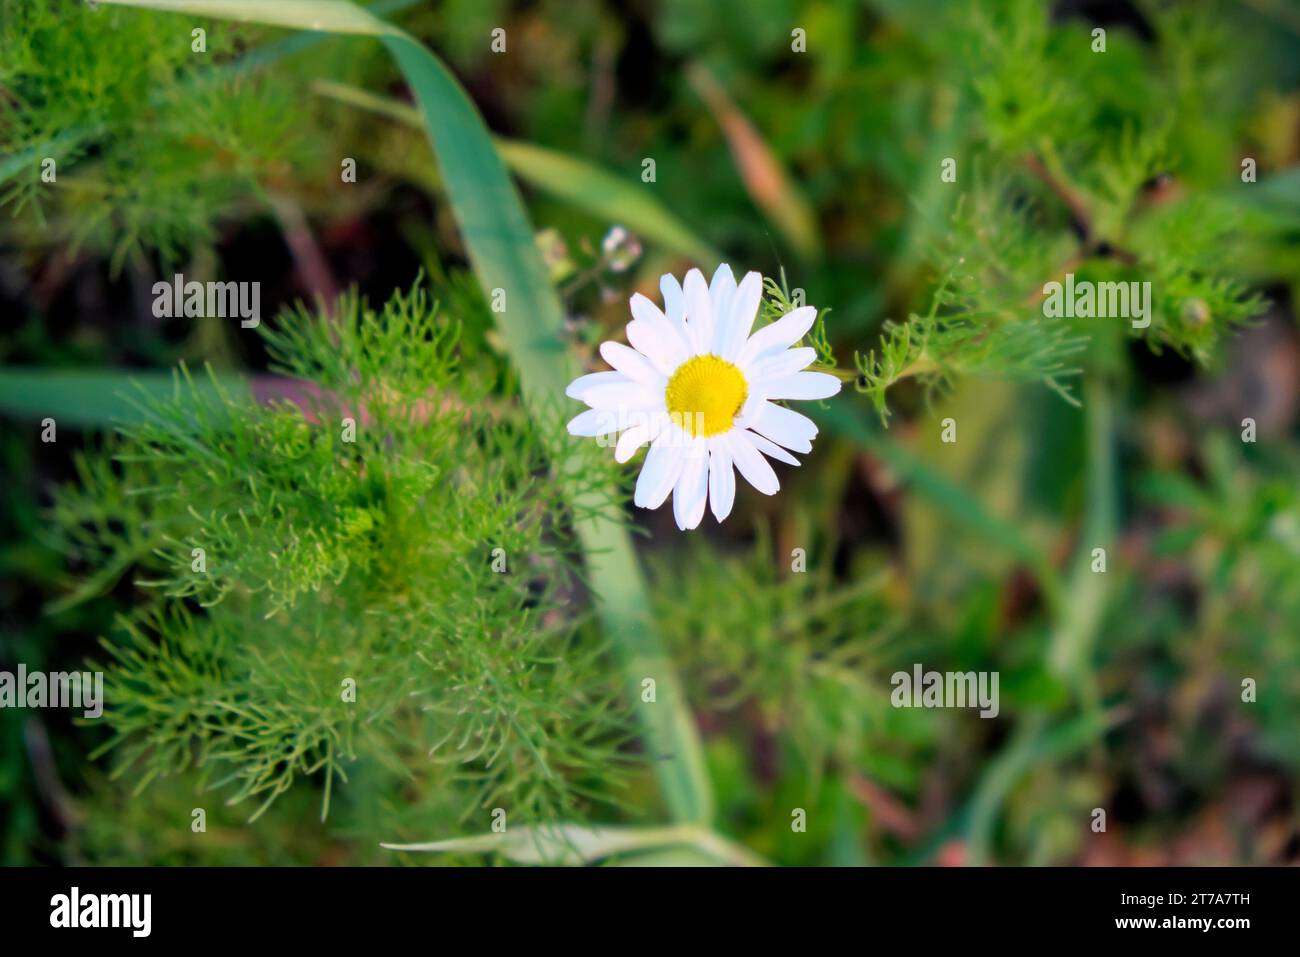 A white daisy flower with a yellow center, surrounded by green foliage. Stock Photo